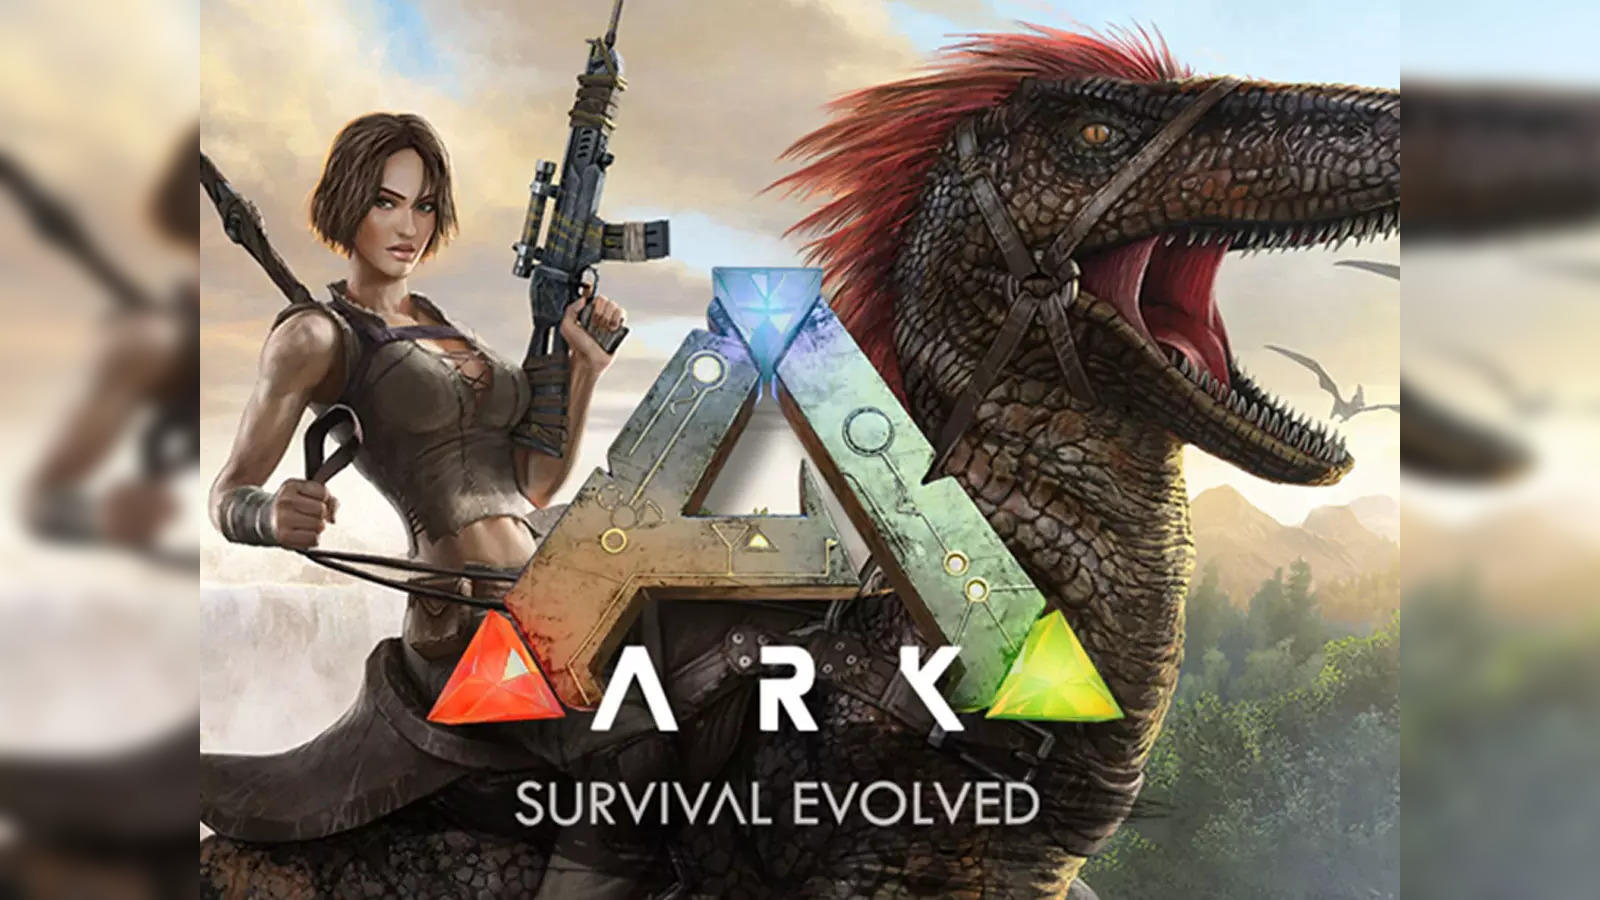 When Will Ark 2 Come? & when will the update of Ark Mobile come? [Ark  survival evolved mobile]Hindi 